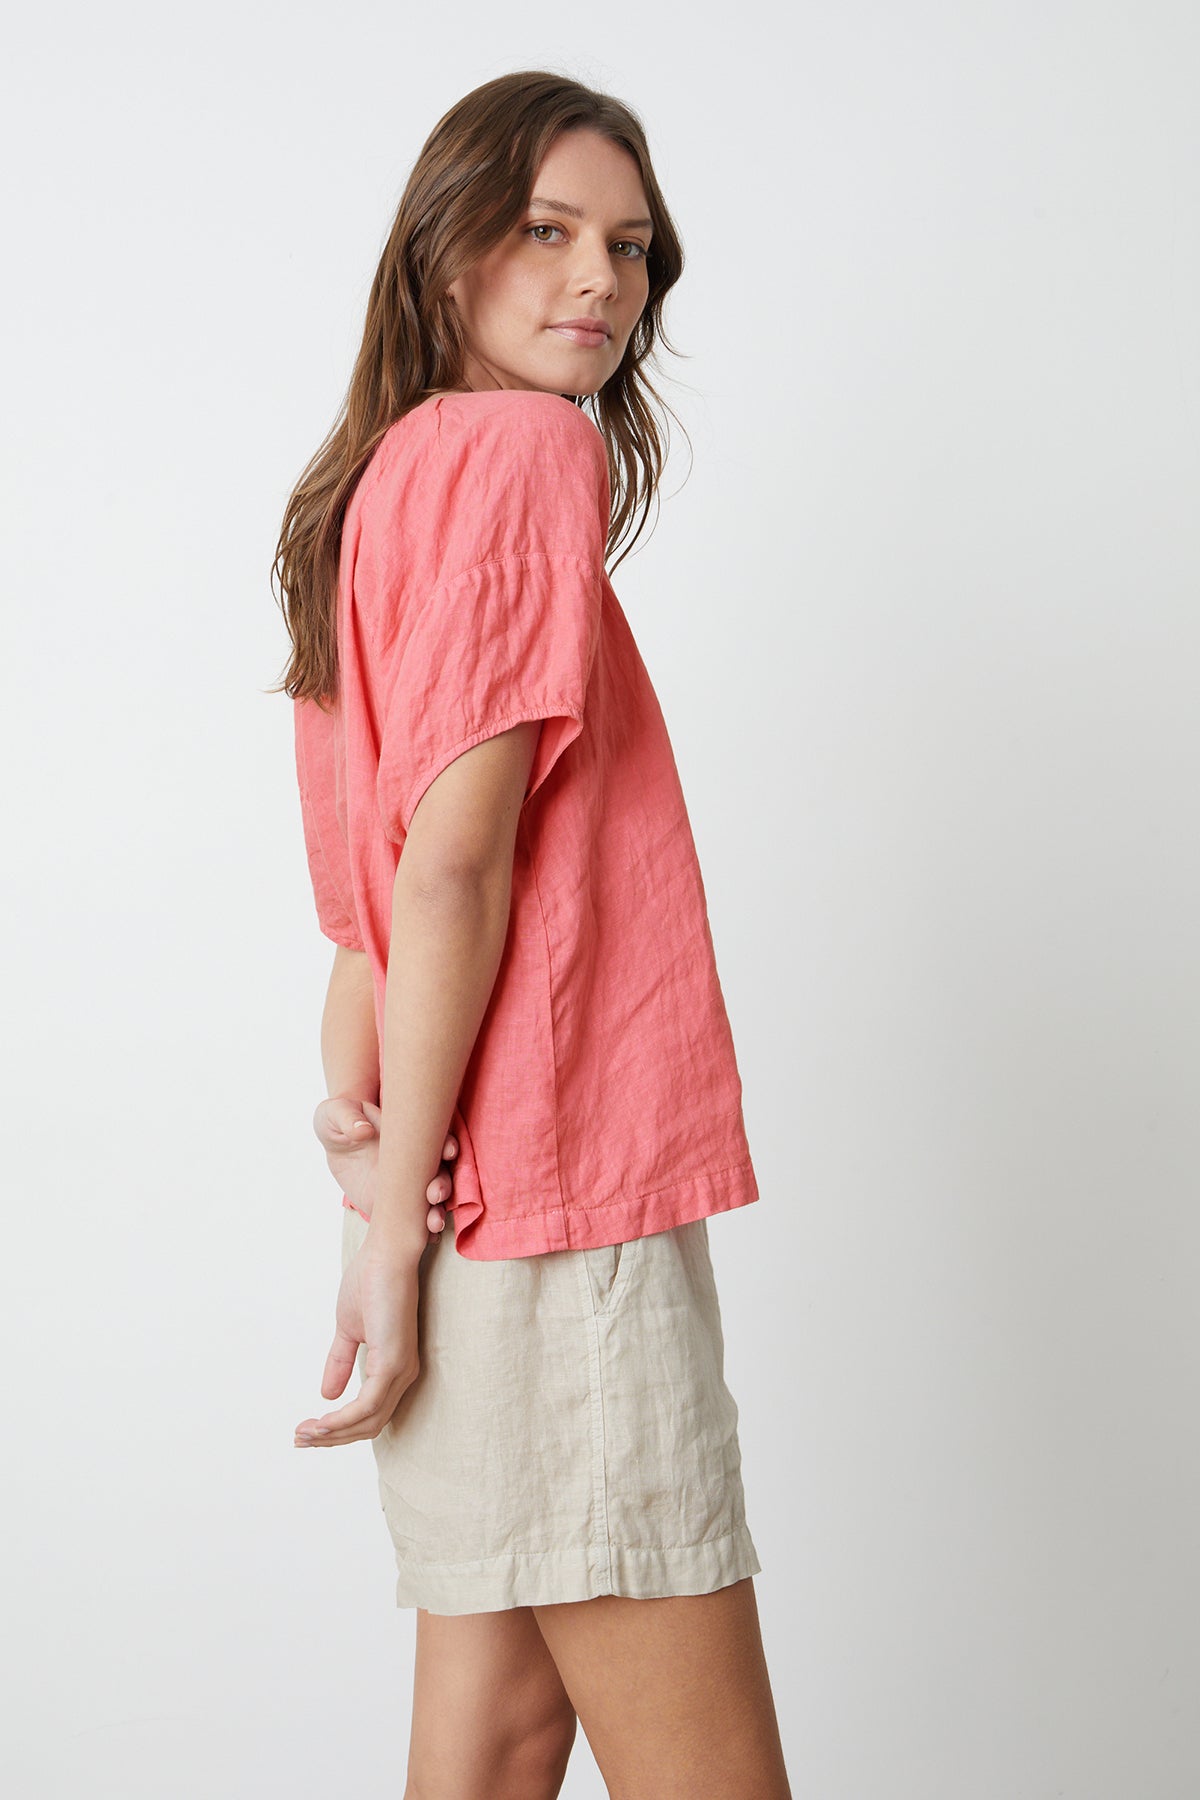   The model is wearing a Velvet by Graham & Spencer CALLIN PUFF SLEEVE LINEN TOP and sand colored Tammy shorts, side view. 